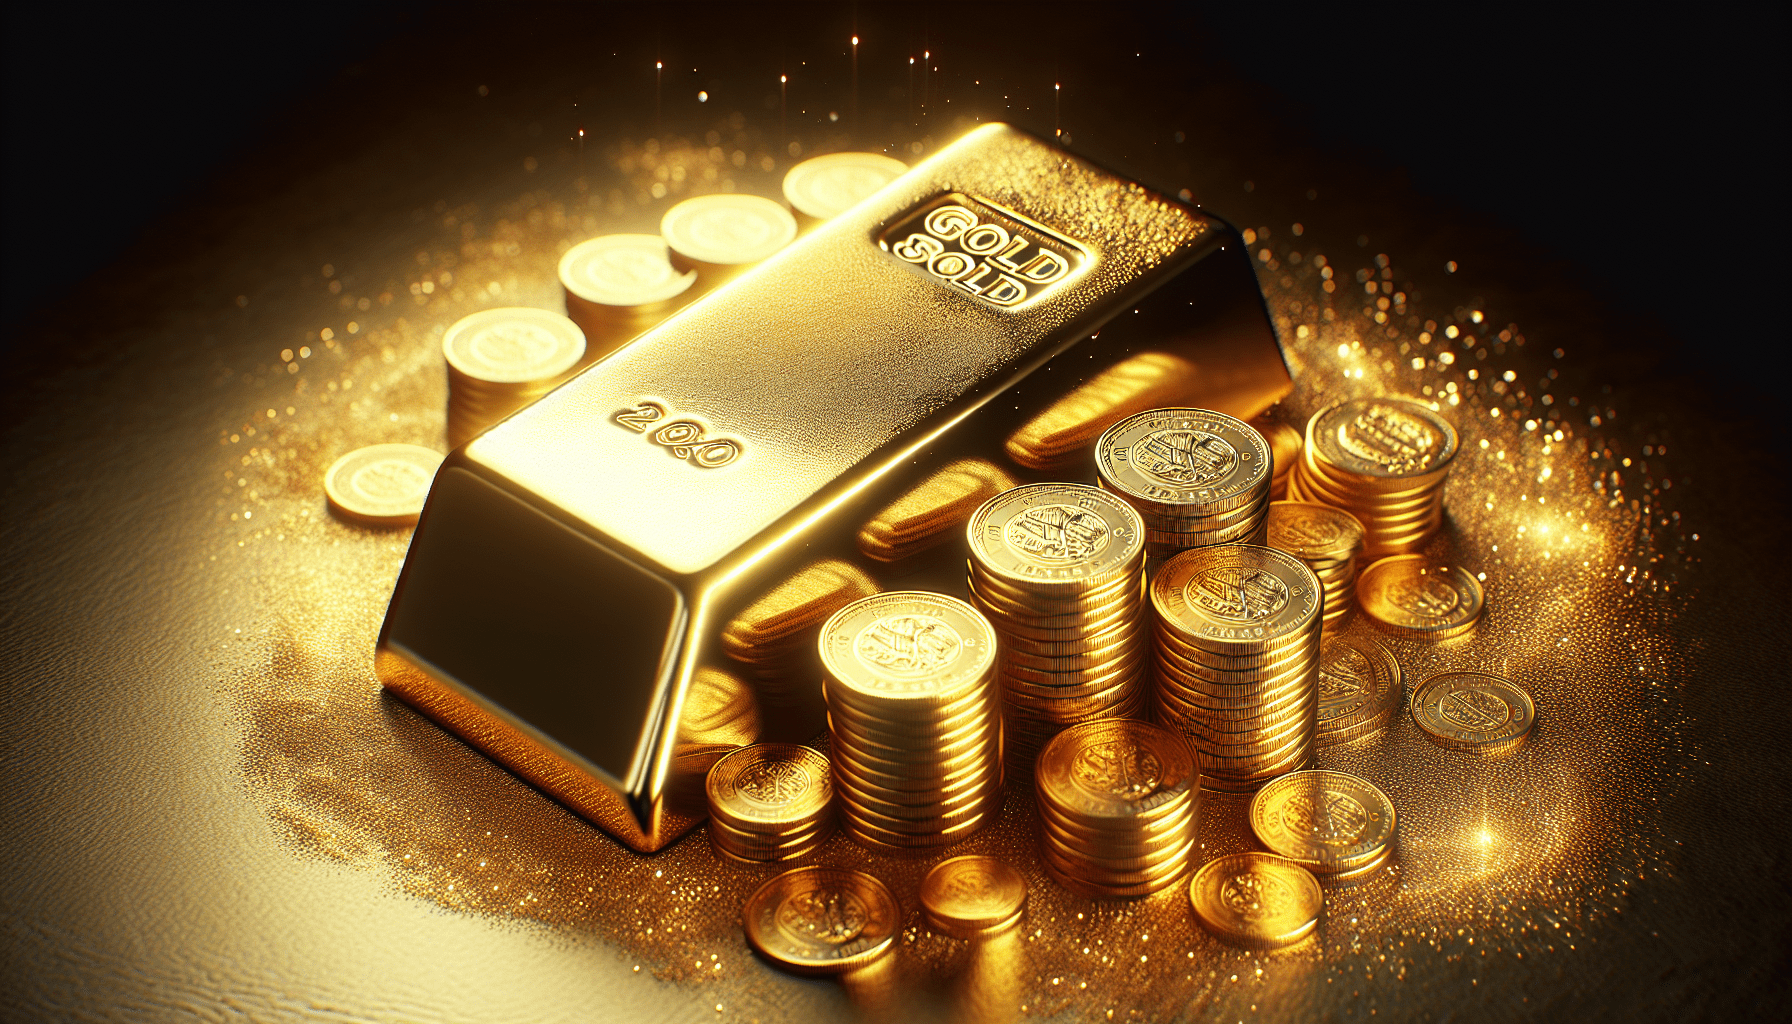 Can I Make Partial Withdrawals From My Gold Investment Account?